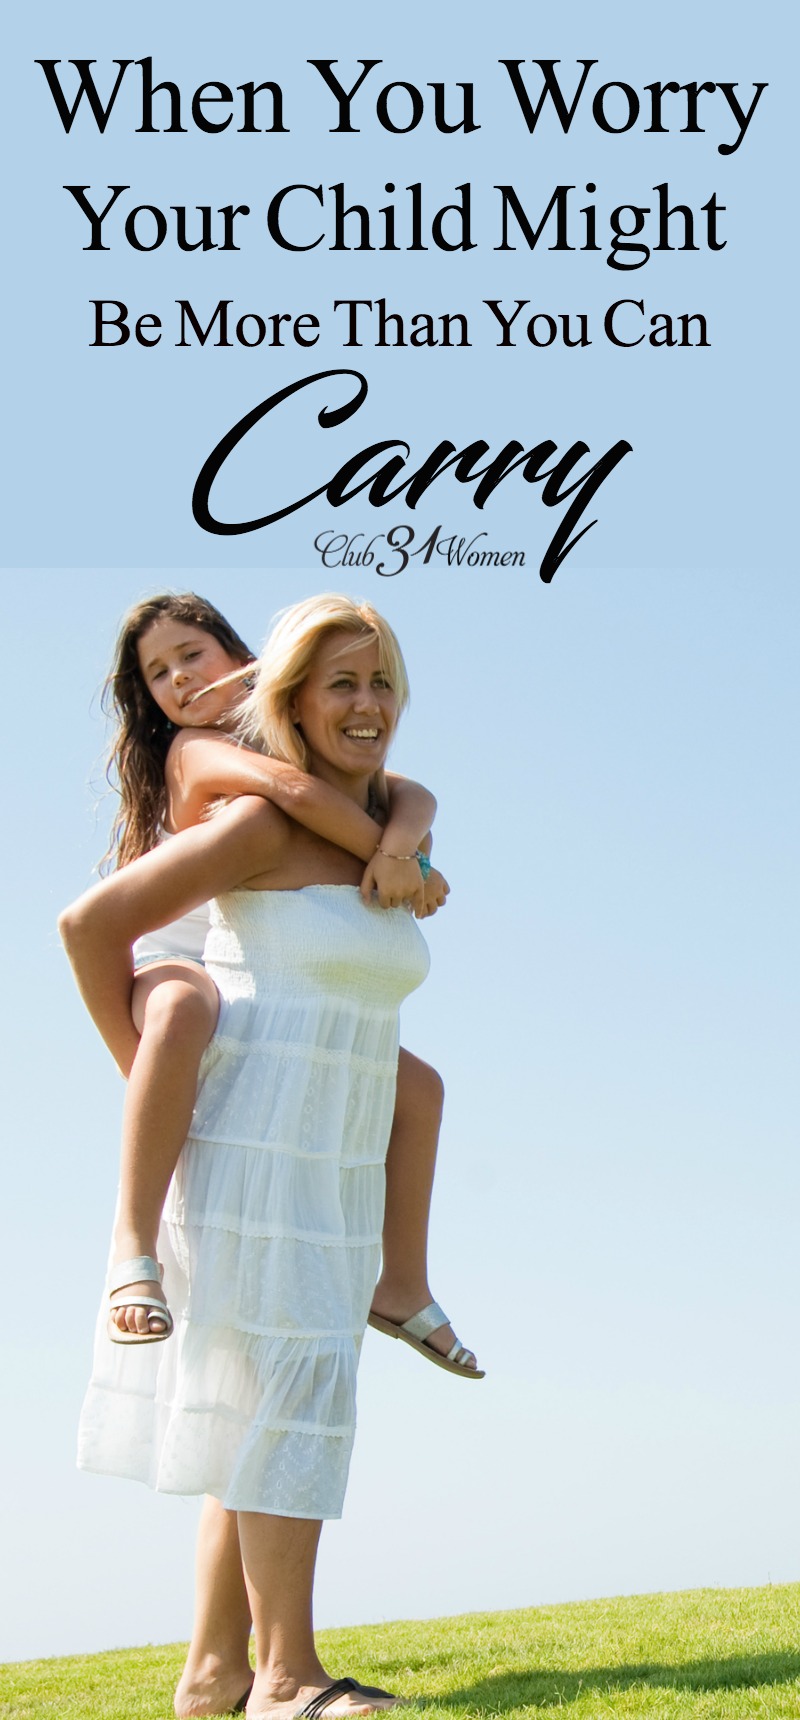 When you're a mom you worry. Sometimes you worry that your child is more than you can carry or manage. But God has equipped you! via @Club31Women